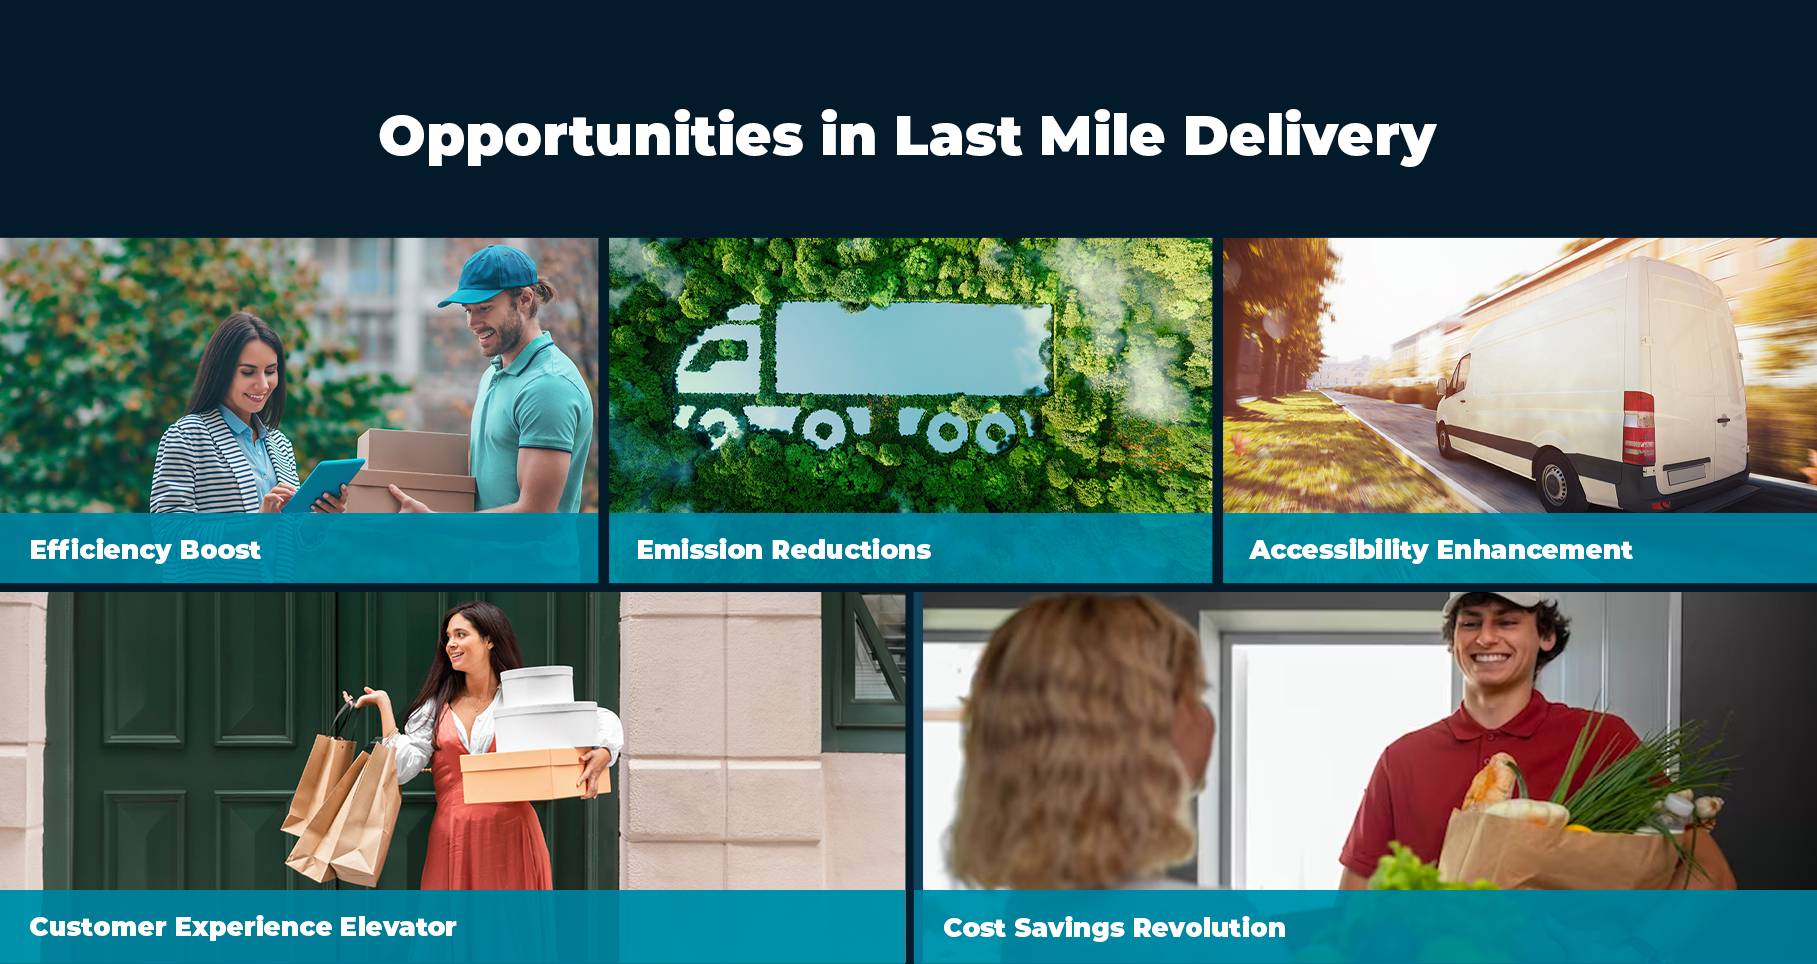 Opportunities in urban retail using last mile delivery software